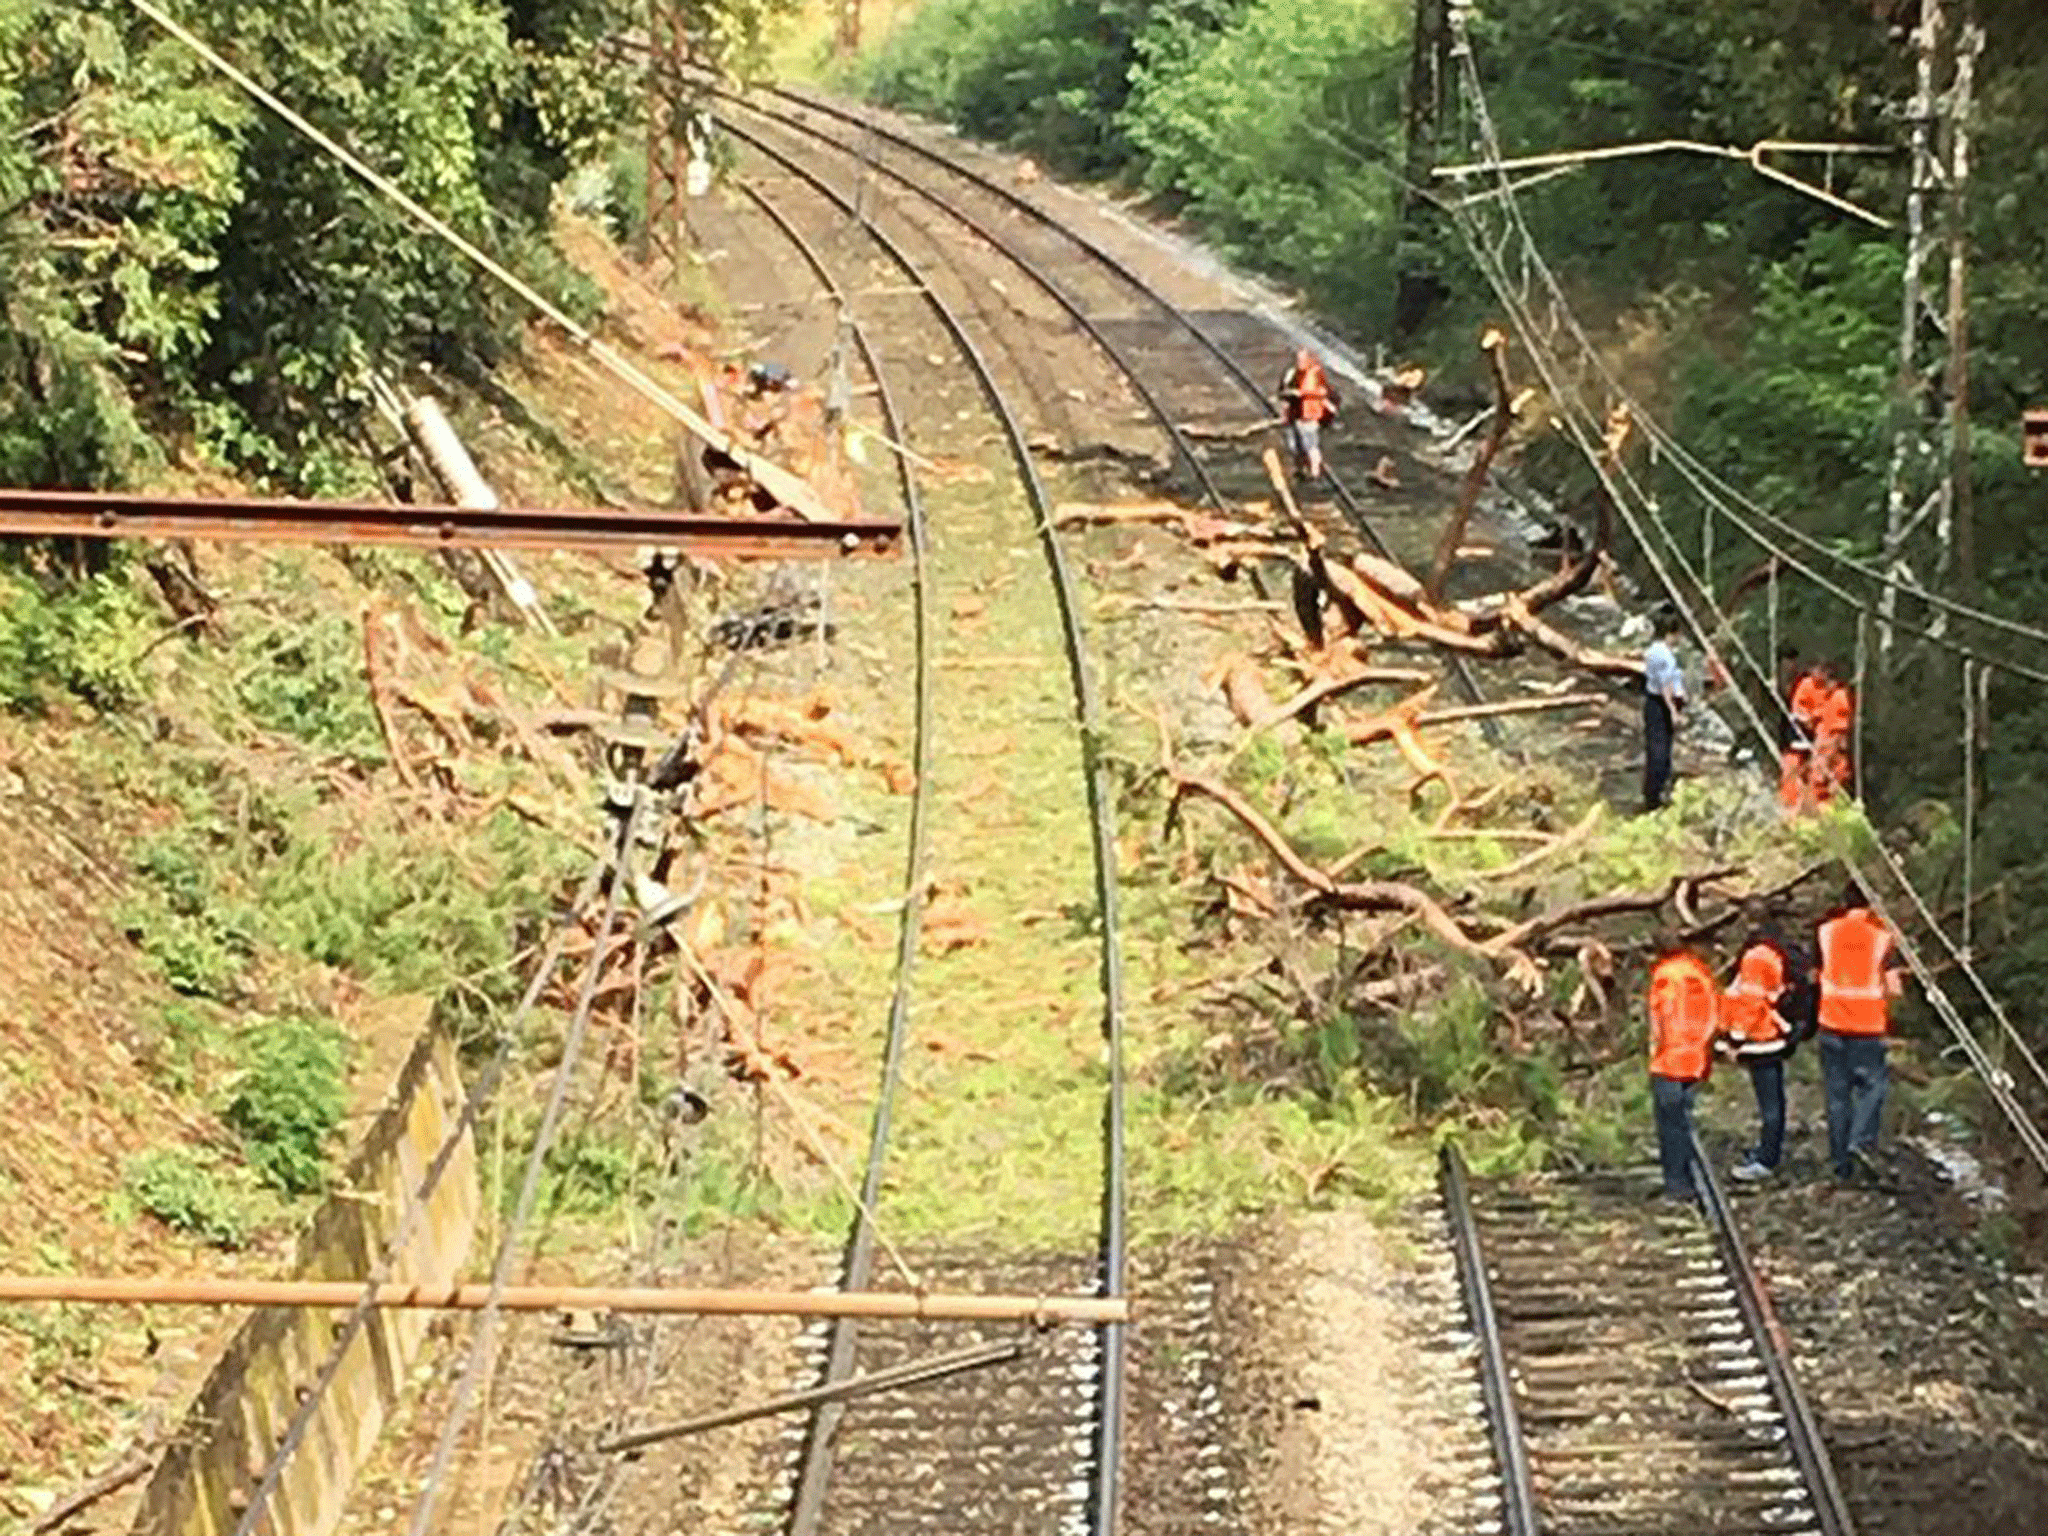 The train crashed into a tree that had fallen onto the tracks